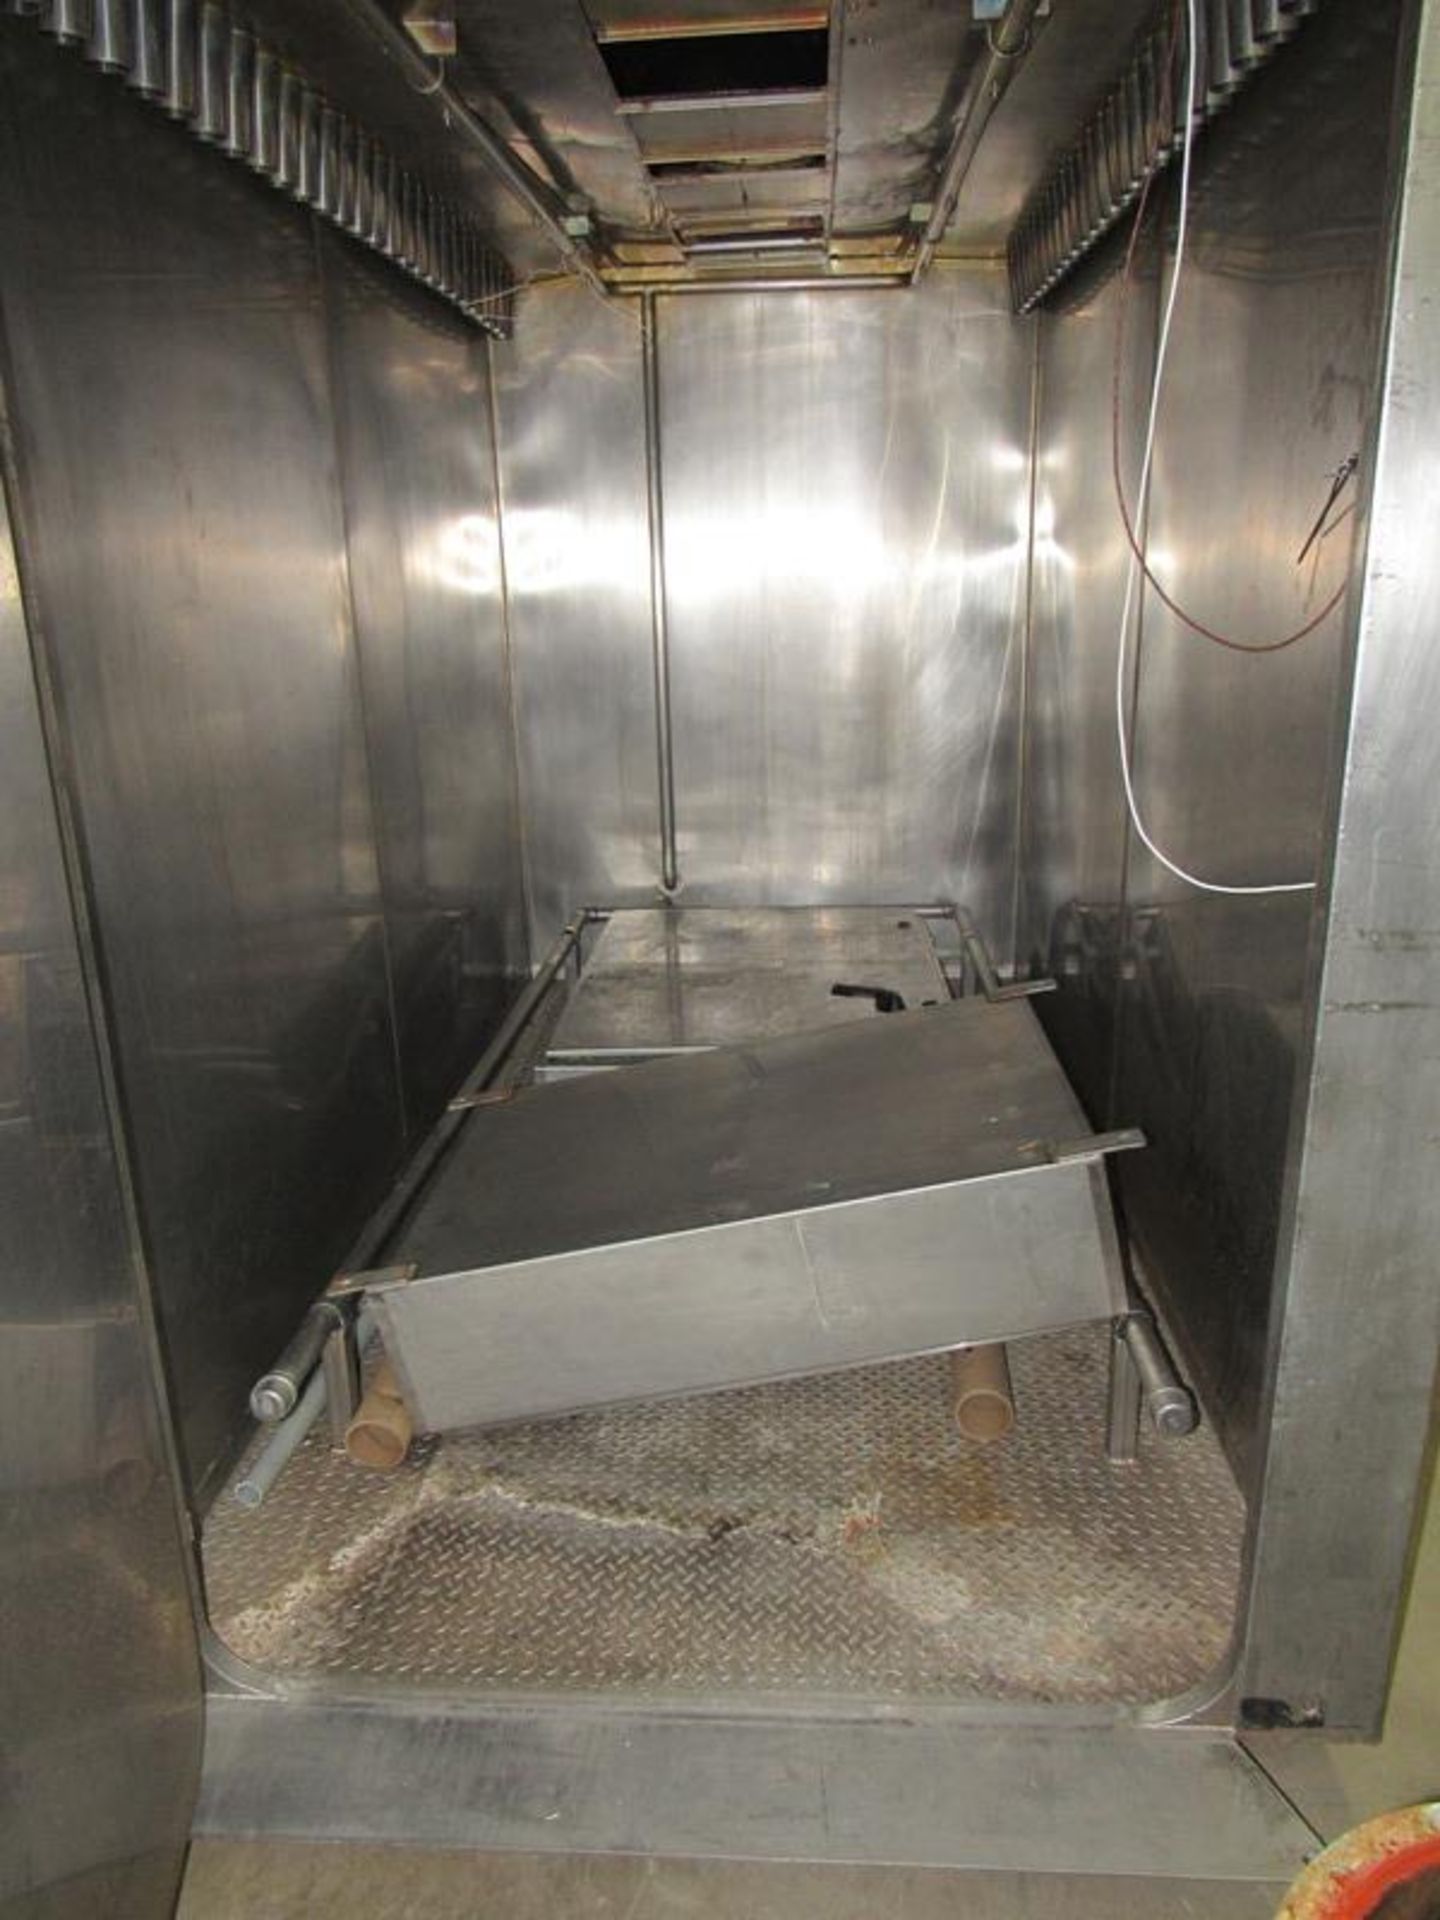 Alkar Stainless Steel Electric Fired 2-Truck Oven with shower, 4' W X 6' T door opening, 44" W - Image 7 of 24